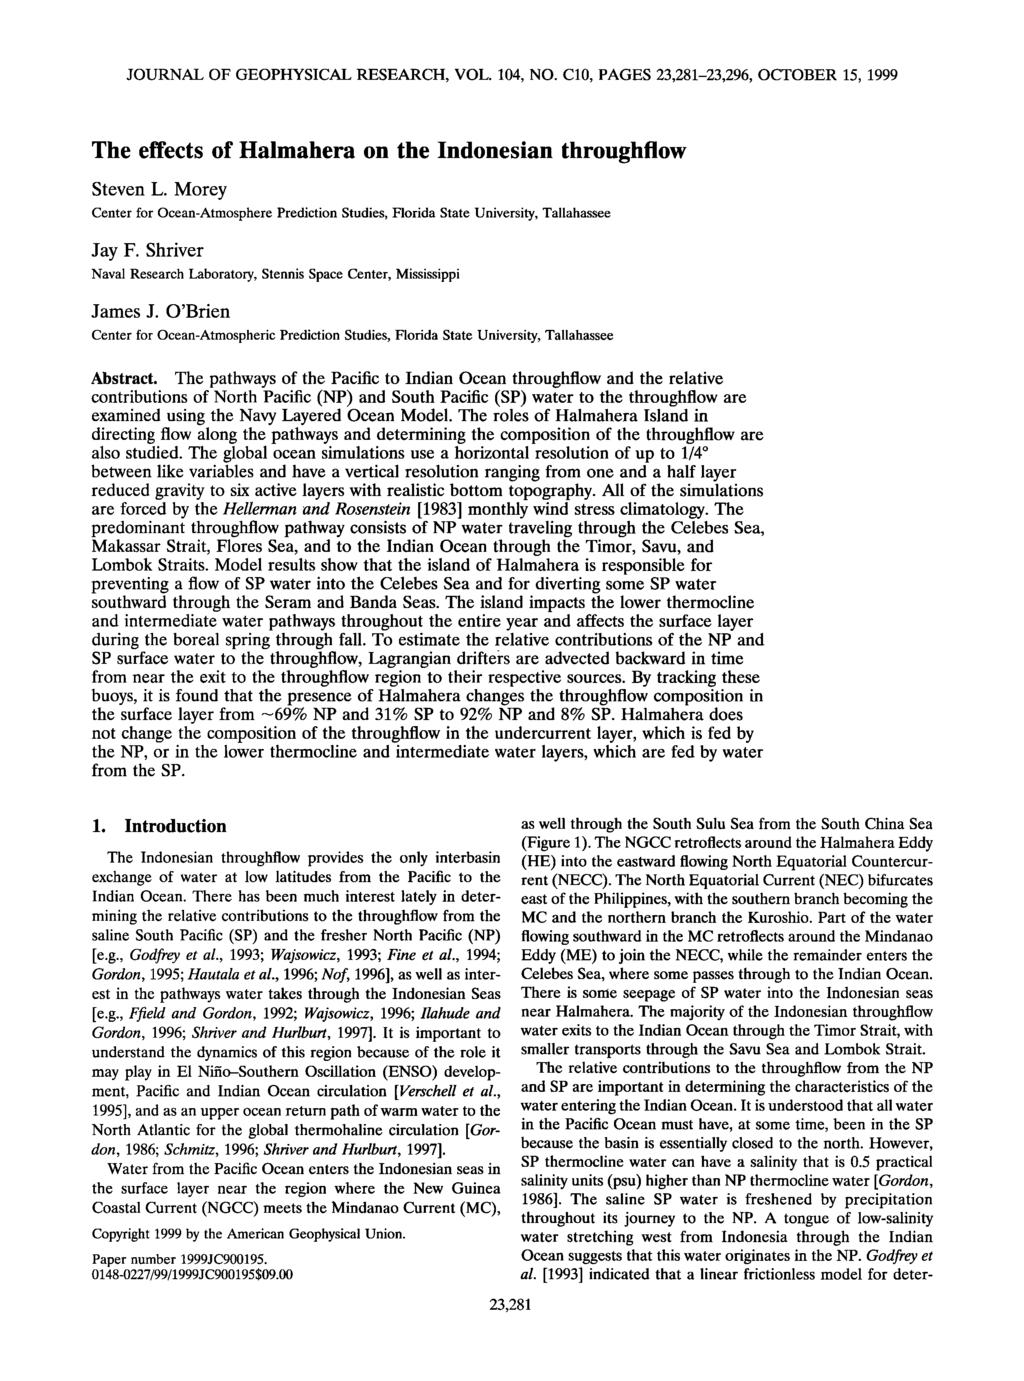 JOURNAL OF GEOPHYSICAL RESEARCH, VOL. 104, NO. C10, PAGES 23,281-23,296, OCTOBER 15, 1999 The effects of Halmahera on the Indonesian throughflow Steven L.